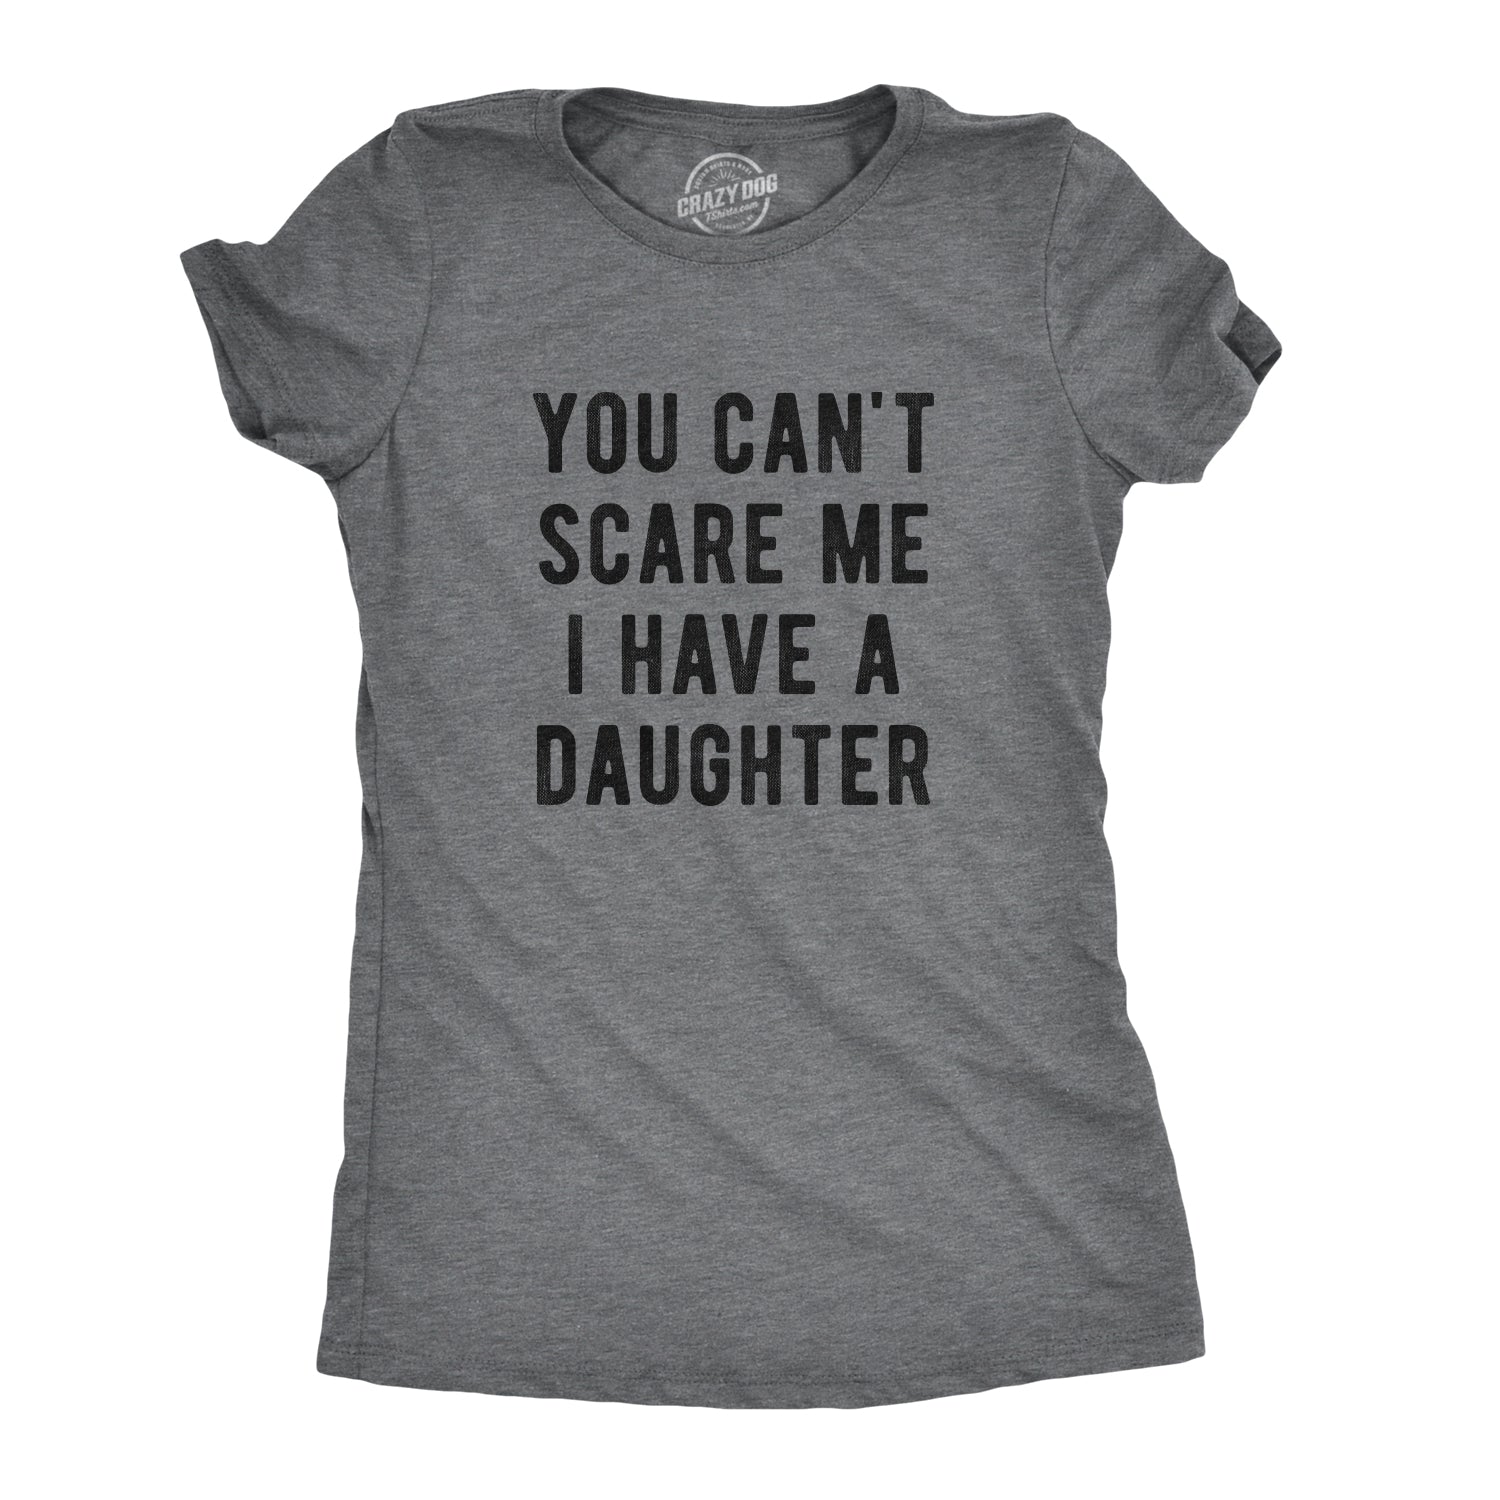 Funny Dark Heather Grey - A Daughter You Can't Scare Me I Have A Daughter Womens T Shirt Nerdy Mother's Day Sarcastic Tee